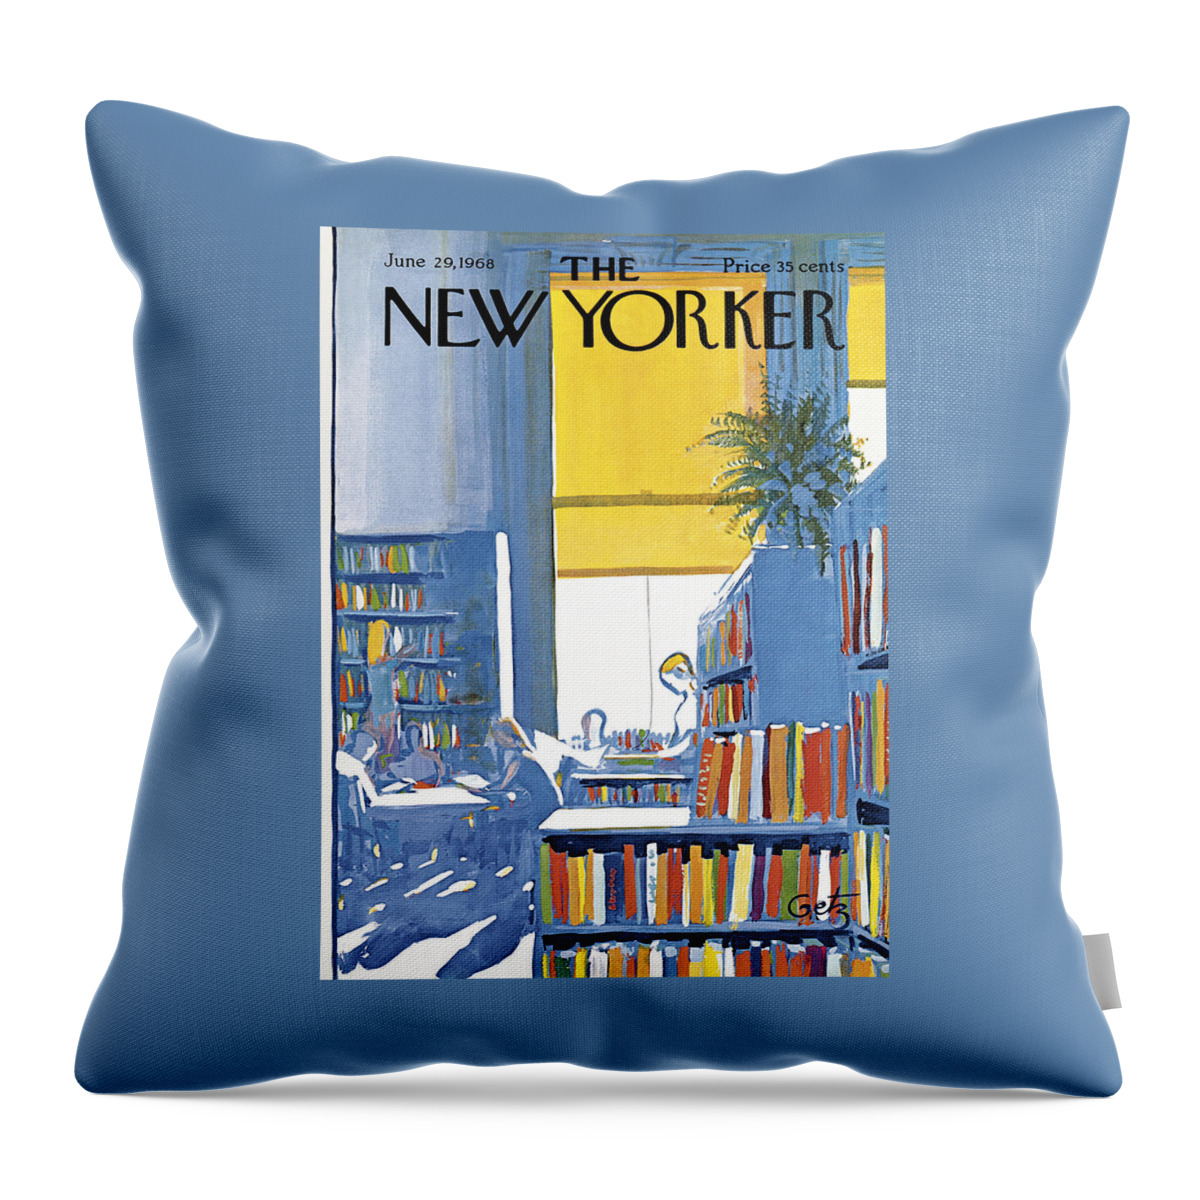 New Yorker June 29th 1968 Throw Pillow